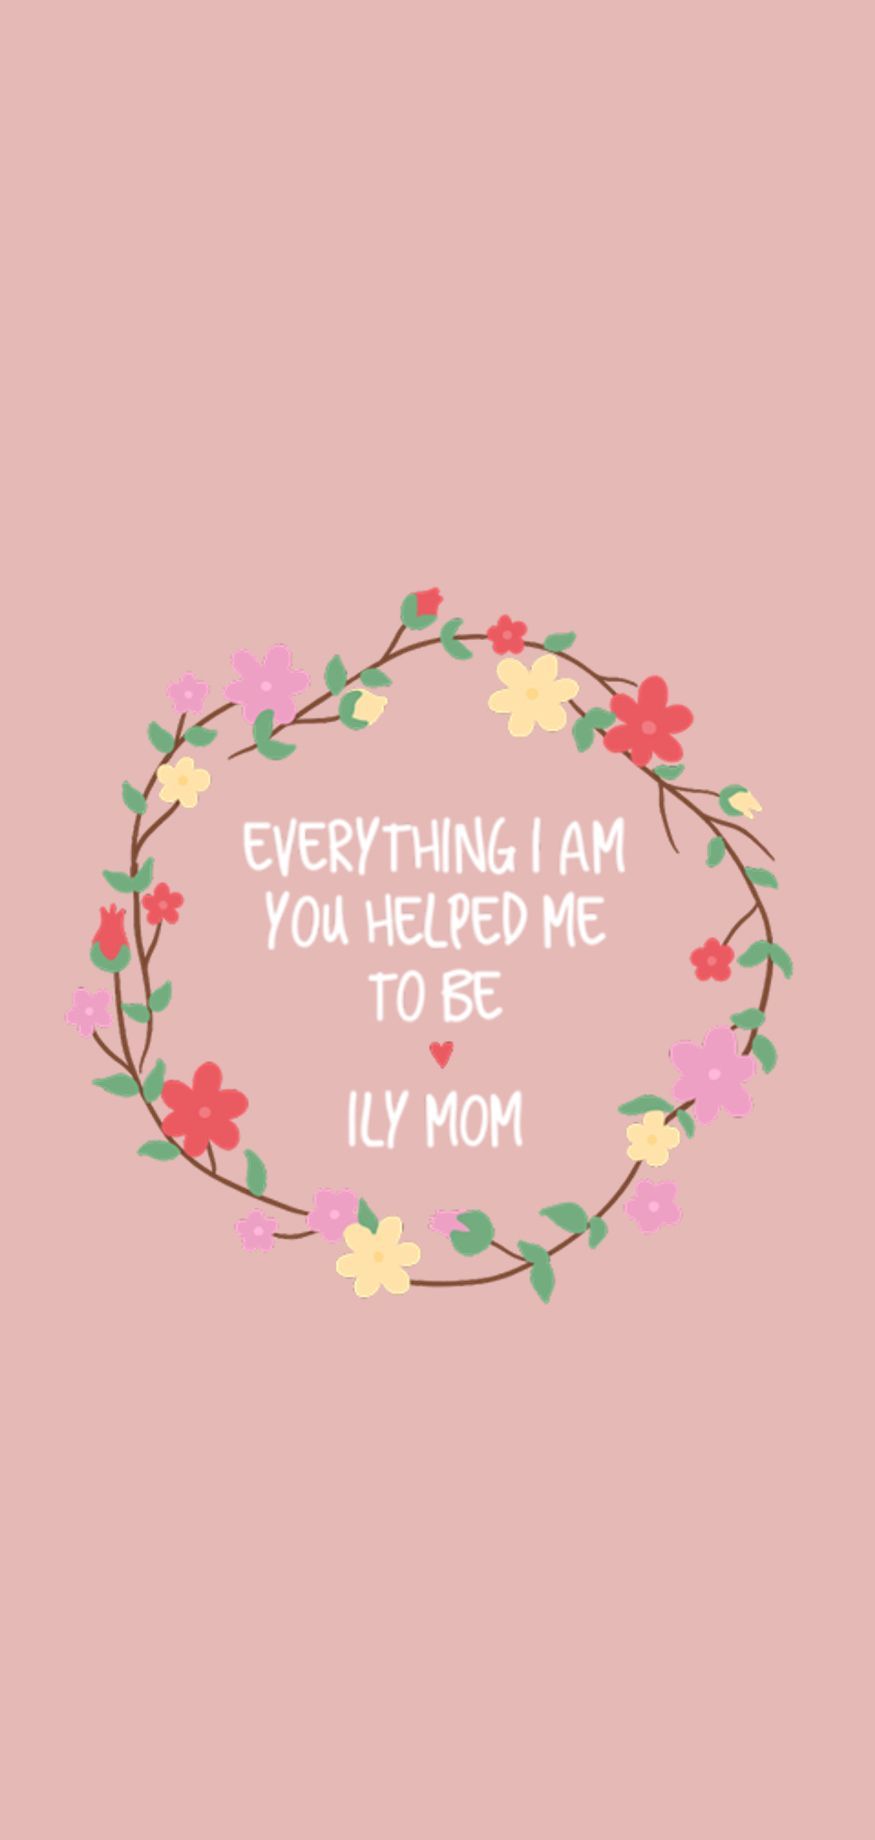 Show some love to your mom, it's her day!. Mums wallpaper, Cute wallpaper for phone, Pink wallpaper iphone